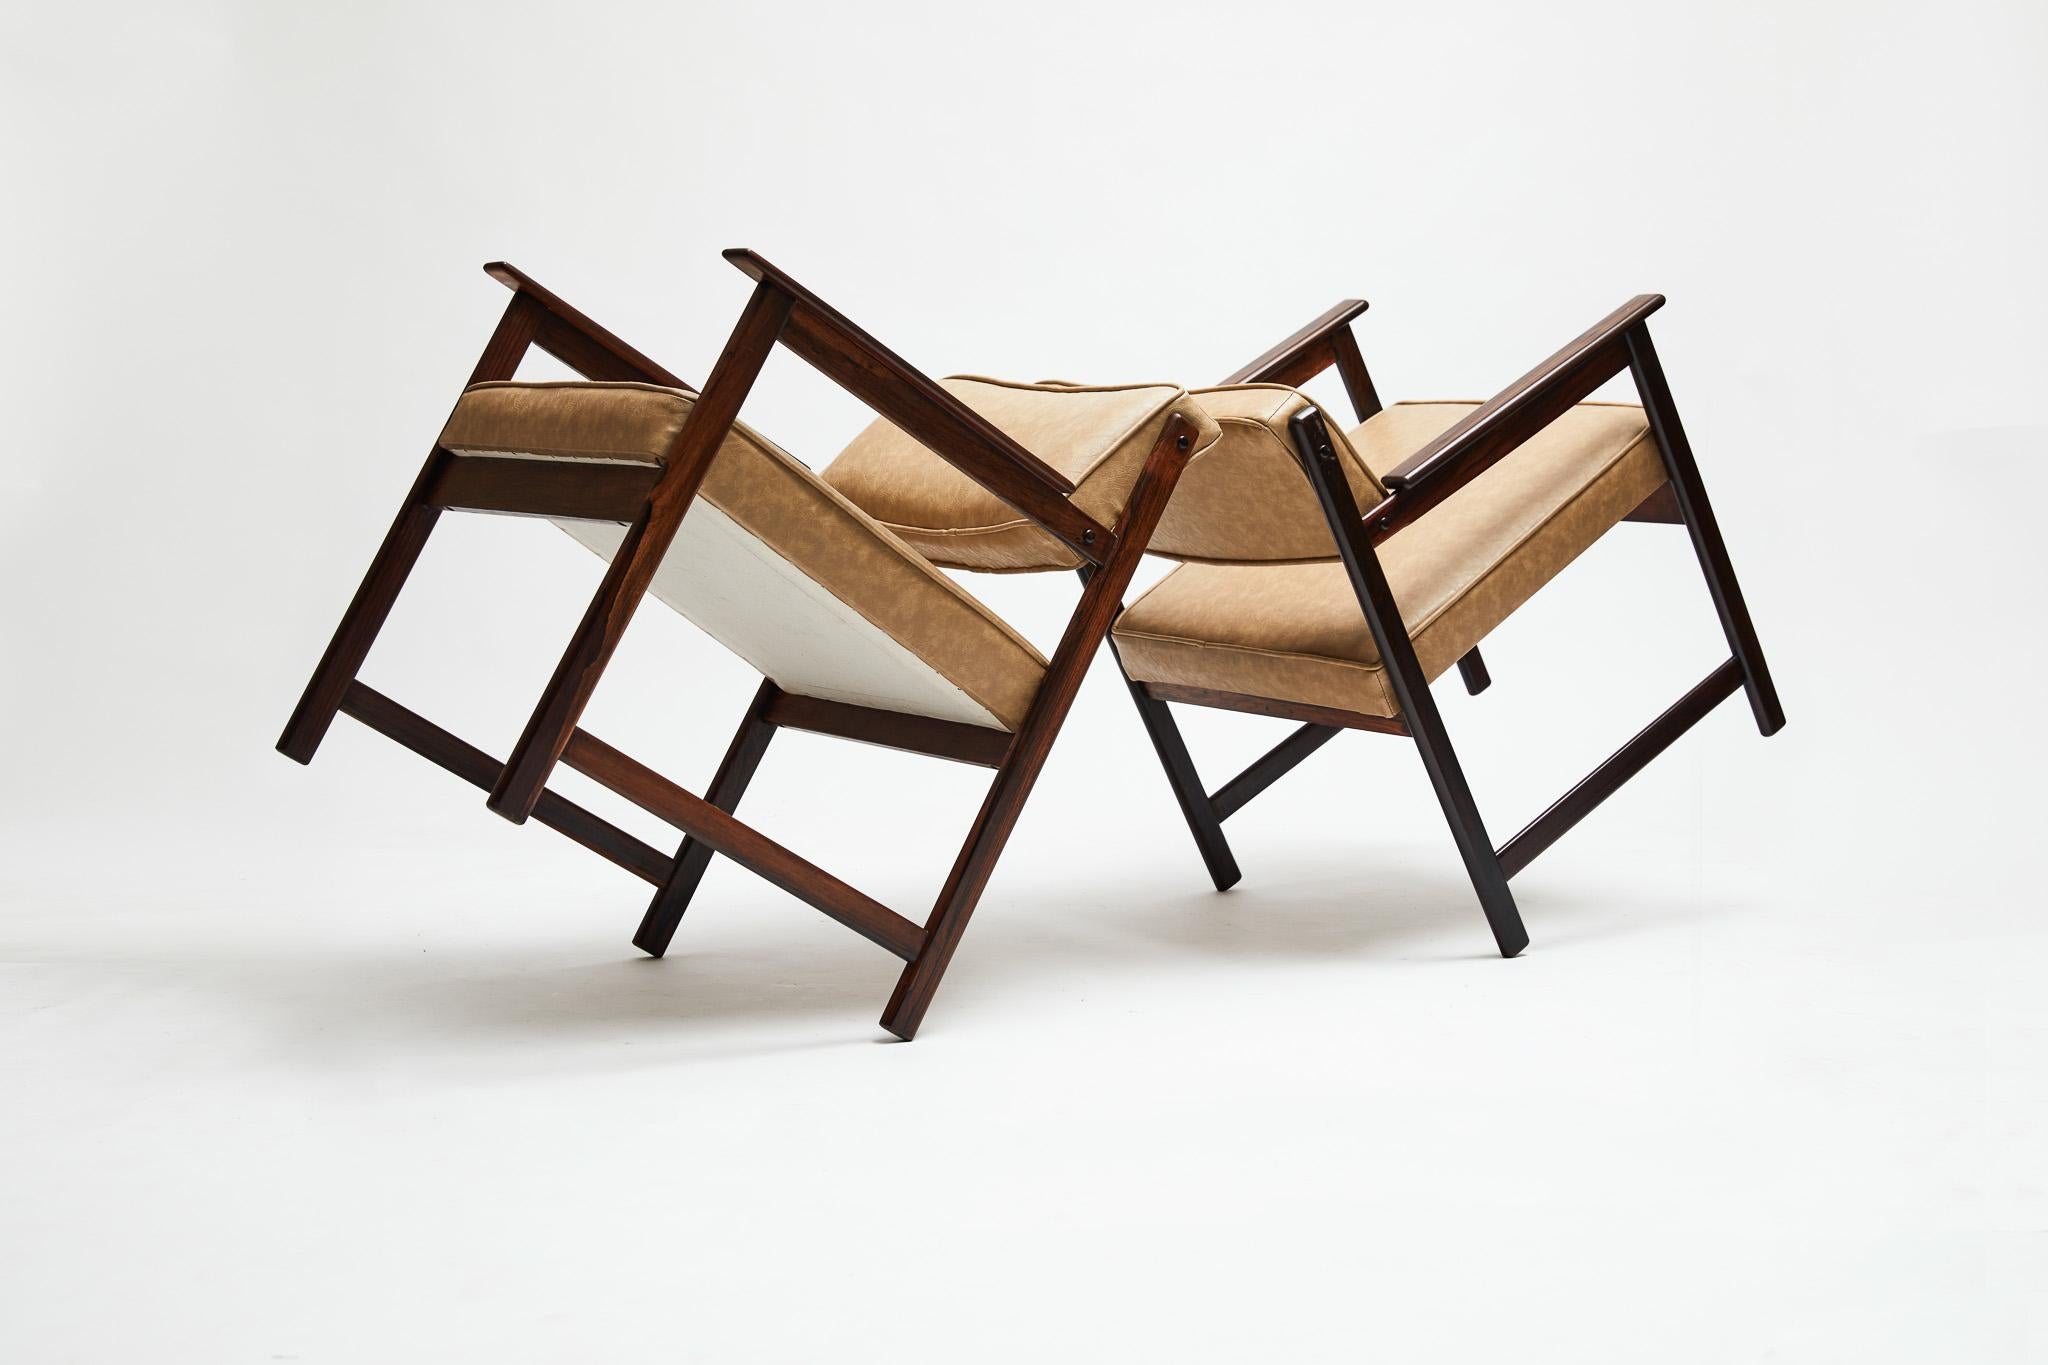 20th Century Midcentury Modern Armchairs in Hardwood & Beige Leather by Jorge Jabour, Brazil